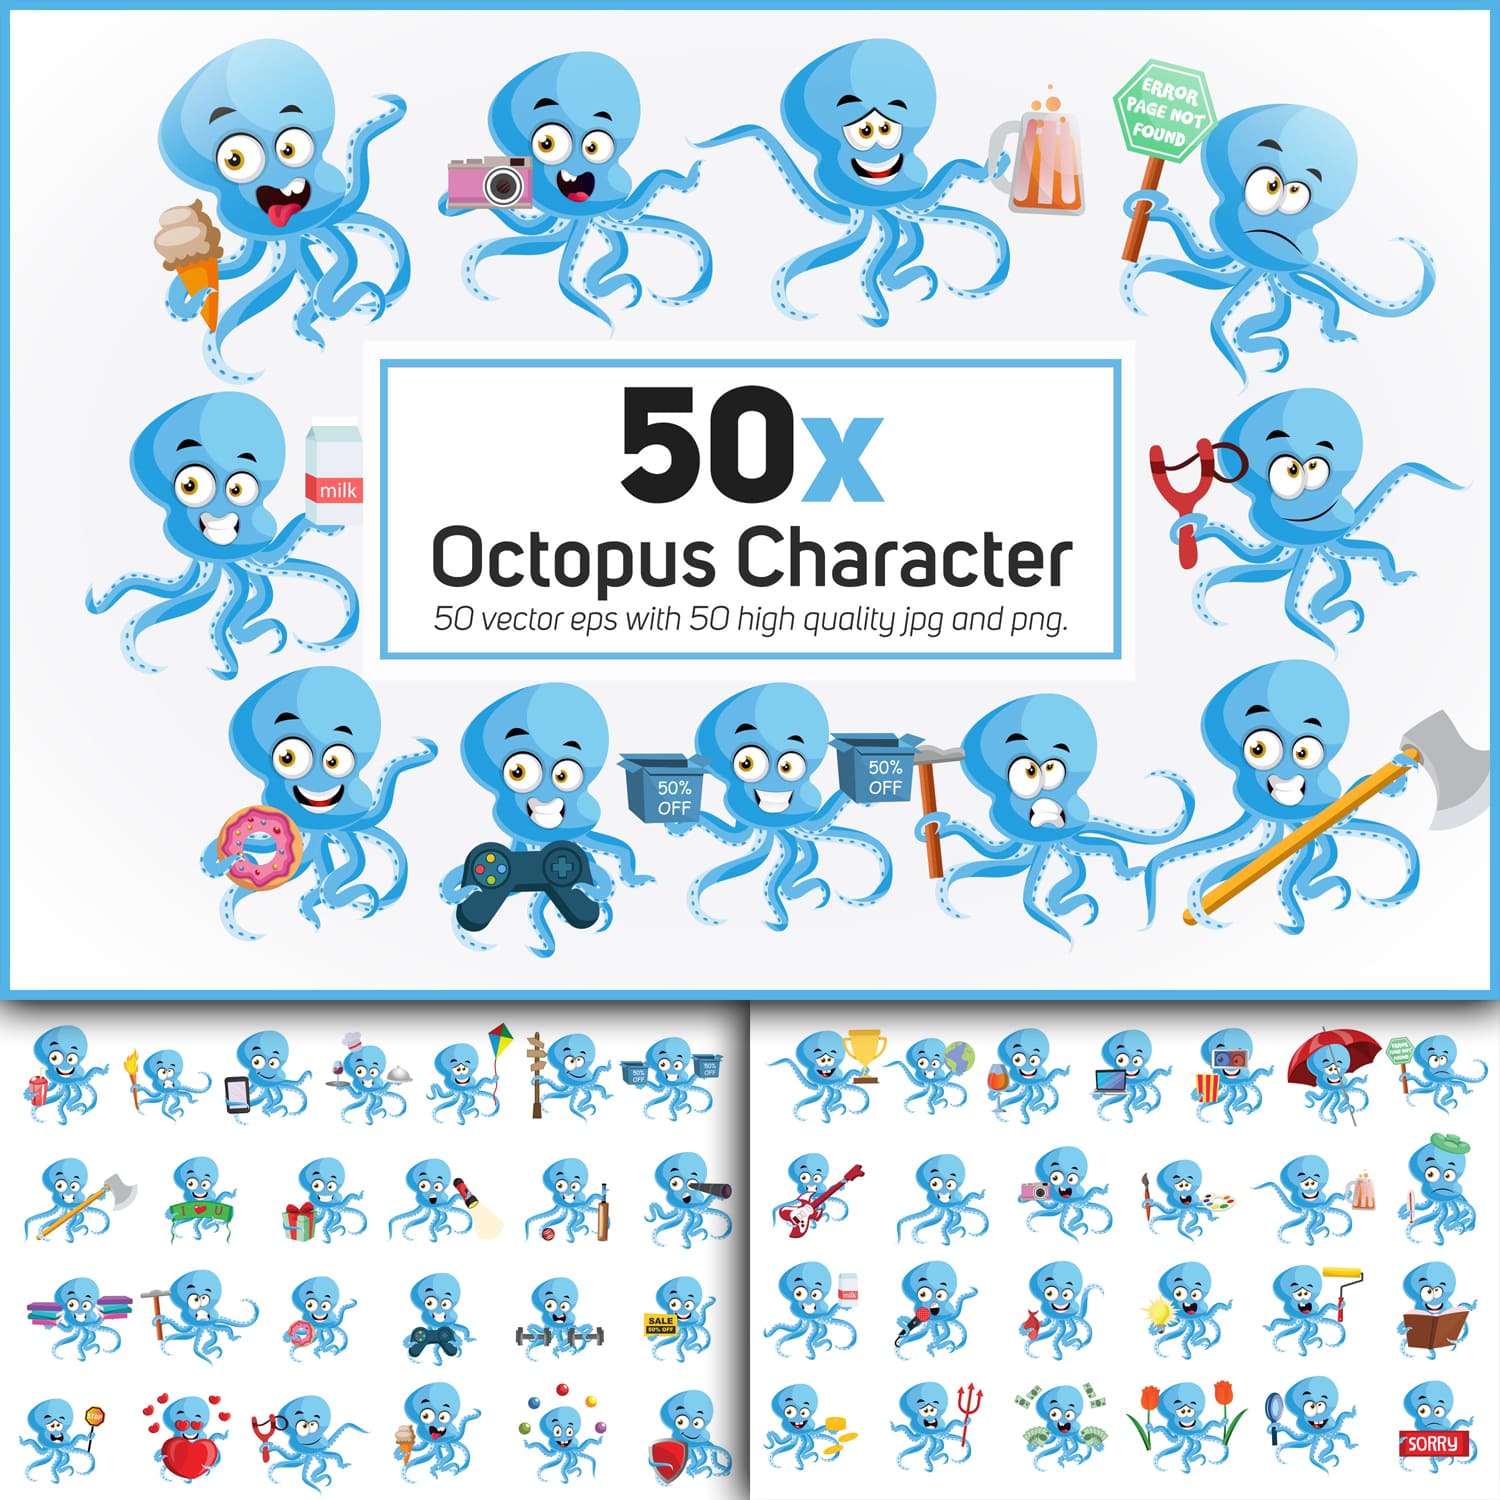 50x Octopus Character and mascot collection illustration.